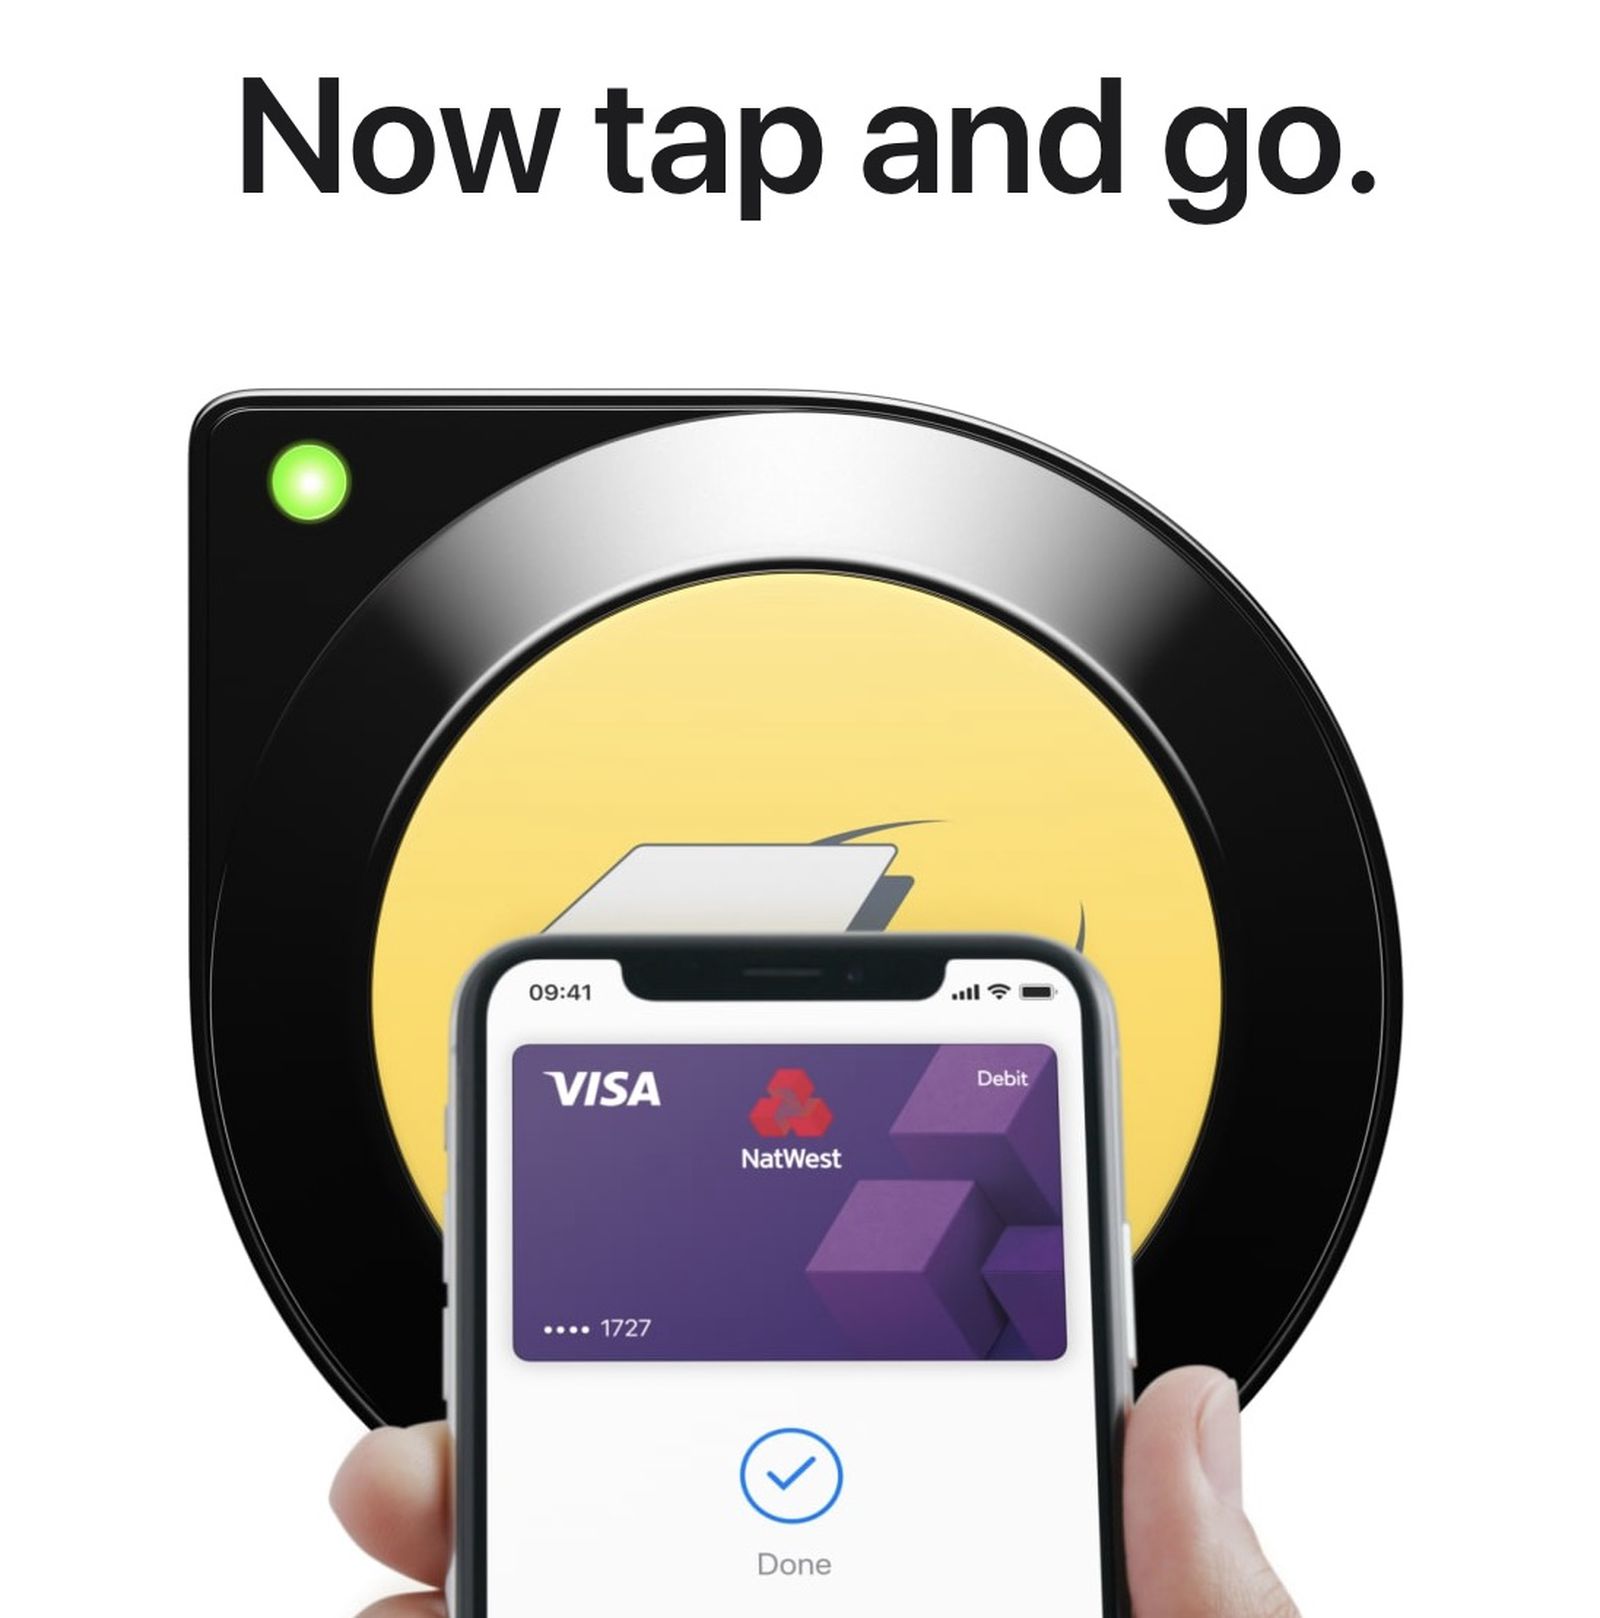 Apple Pay S Tap And Go Express Transit Mode Now Live In London